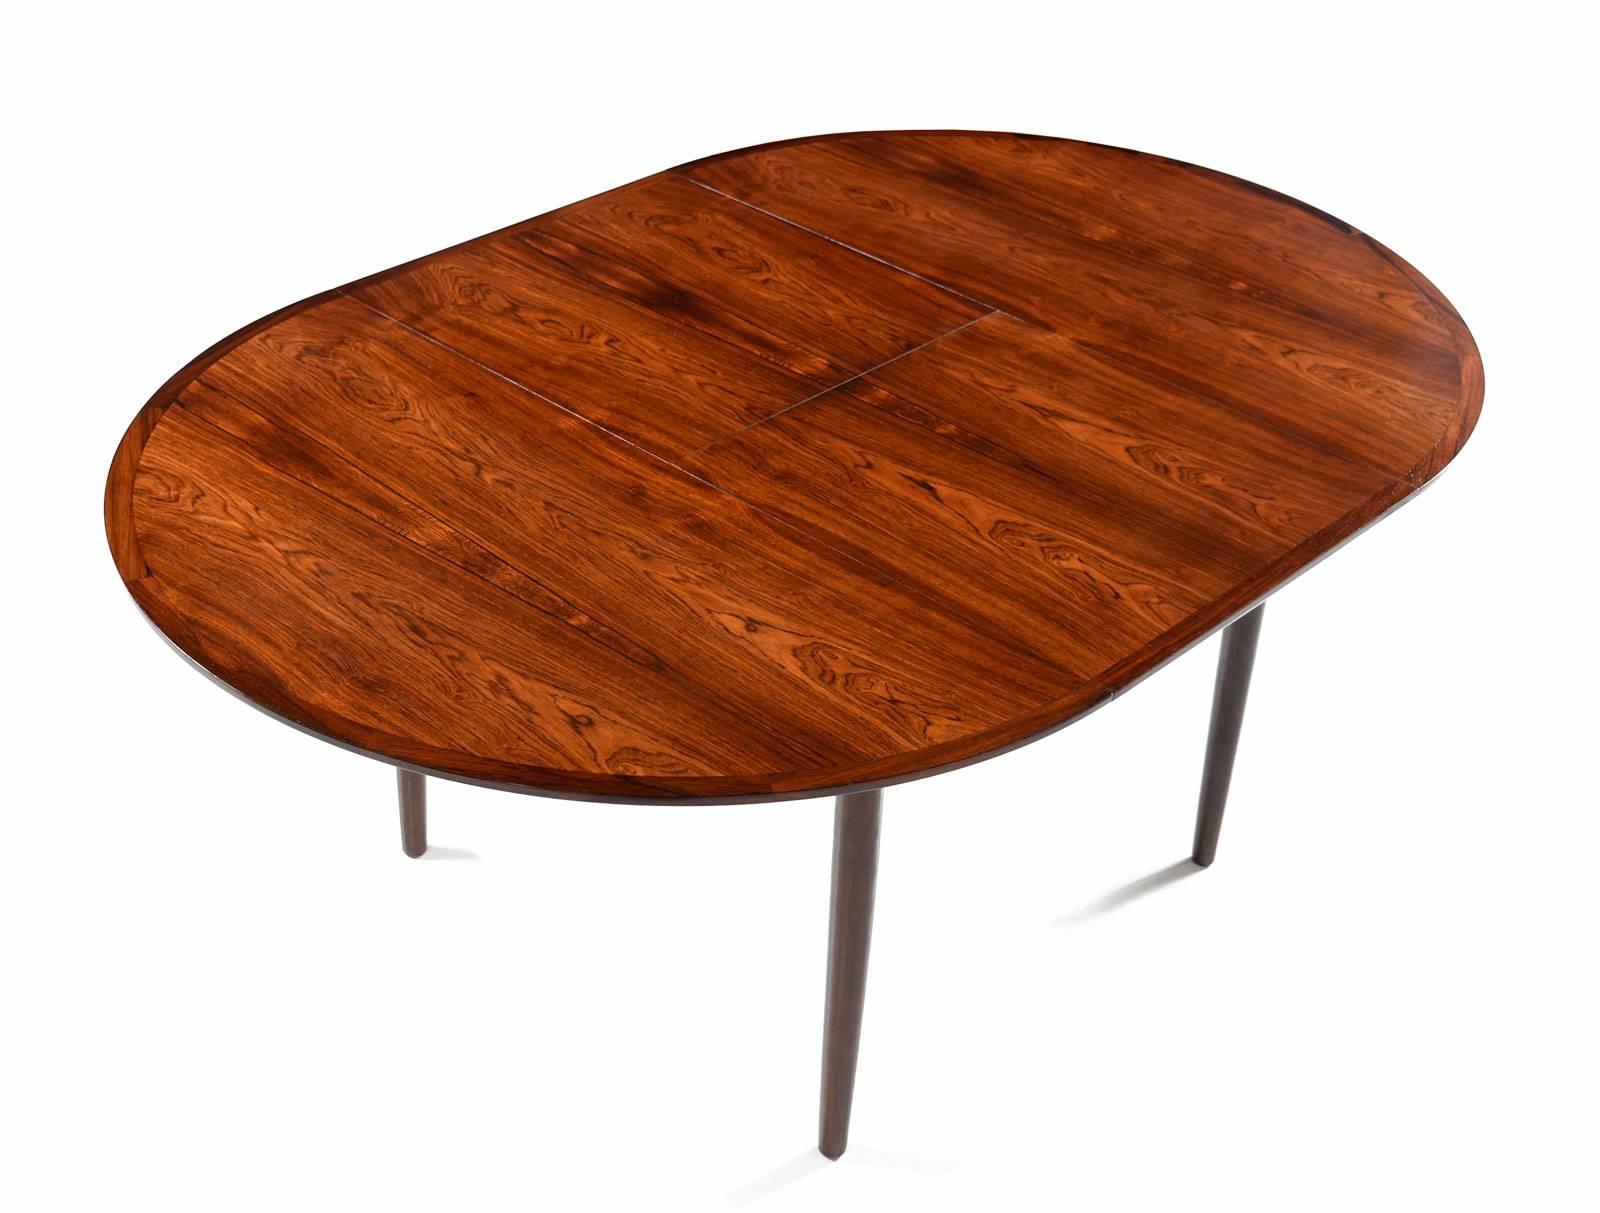 Beautifully restored Danish rosewood dining table with a folding, self-stowing, butterfly leaf at center. Circular when compact, expand the leaf to convert the table to a larger oval. Self-storing leaf is perfect for quick and easy storage when